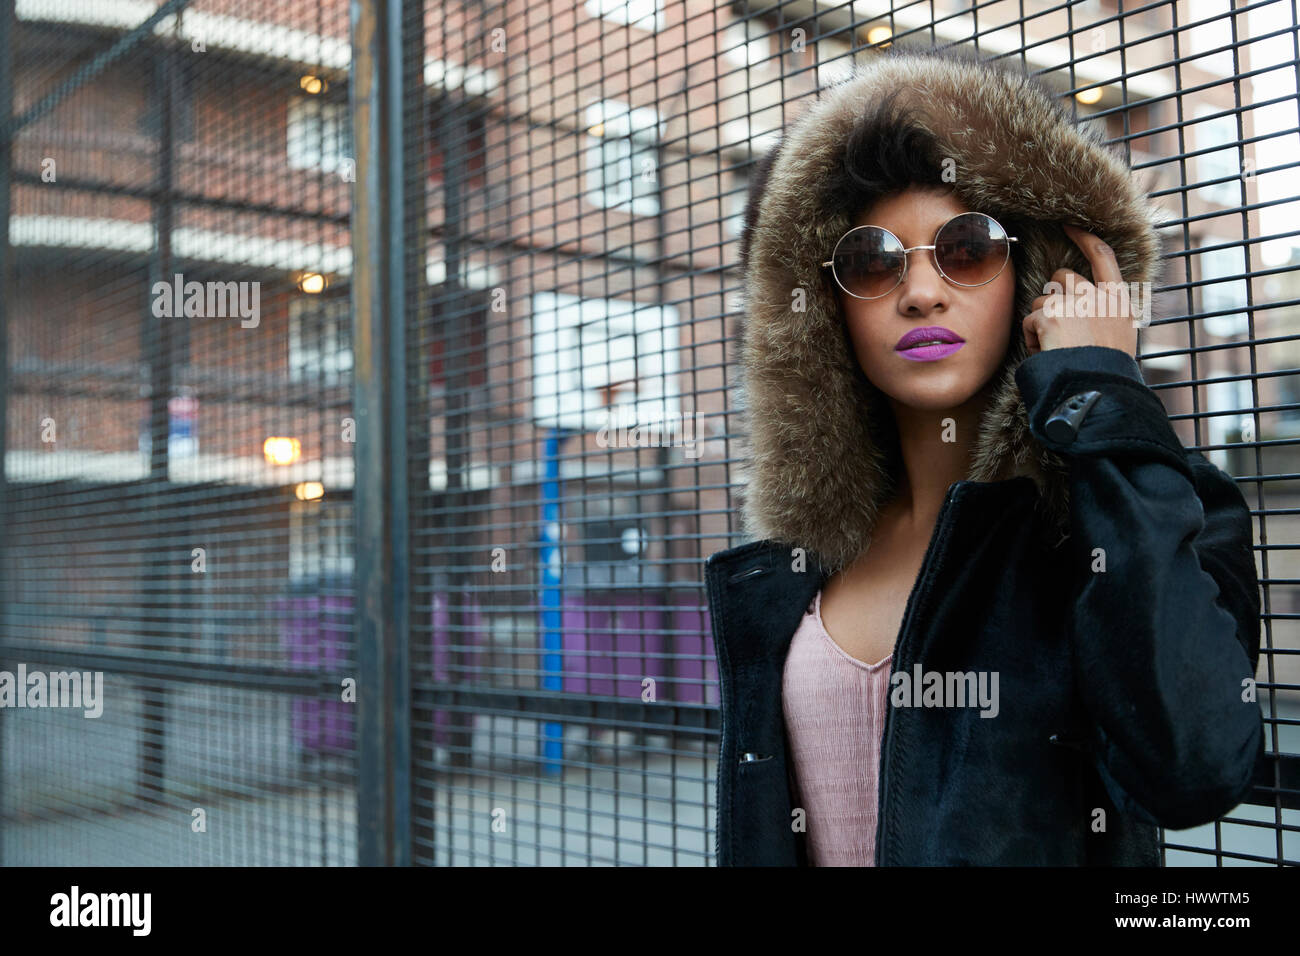 Young woman in fur-lined hood standing by fence, horizontal Stock Photo